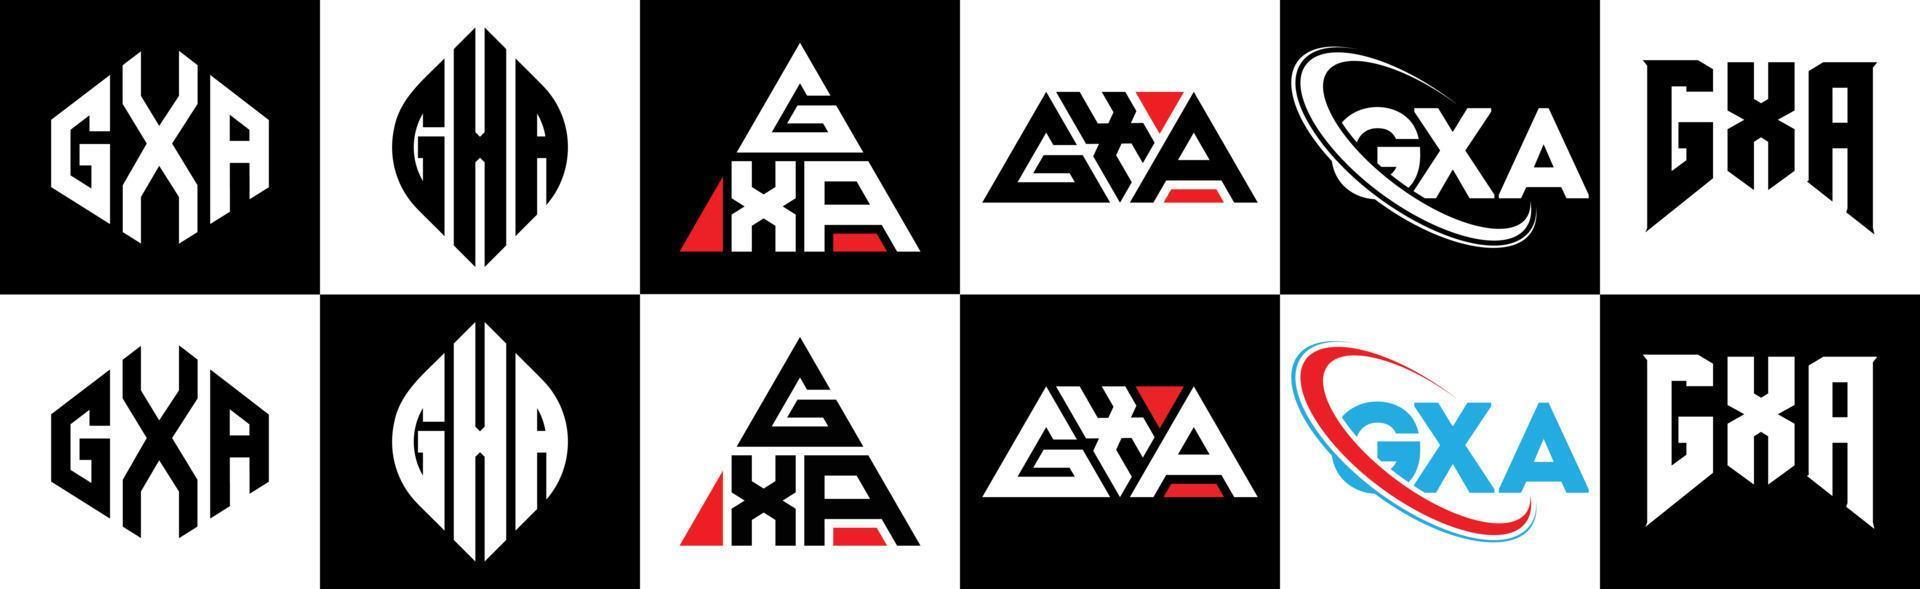 GXA letter logo design in six style. GXA polygon, circle, triangle, hexagon, flat and simple style with black and white color variation letter logo set in one artboard. GXA minimalist and classic logo vector